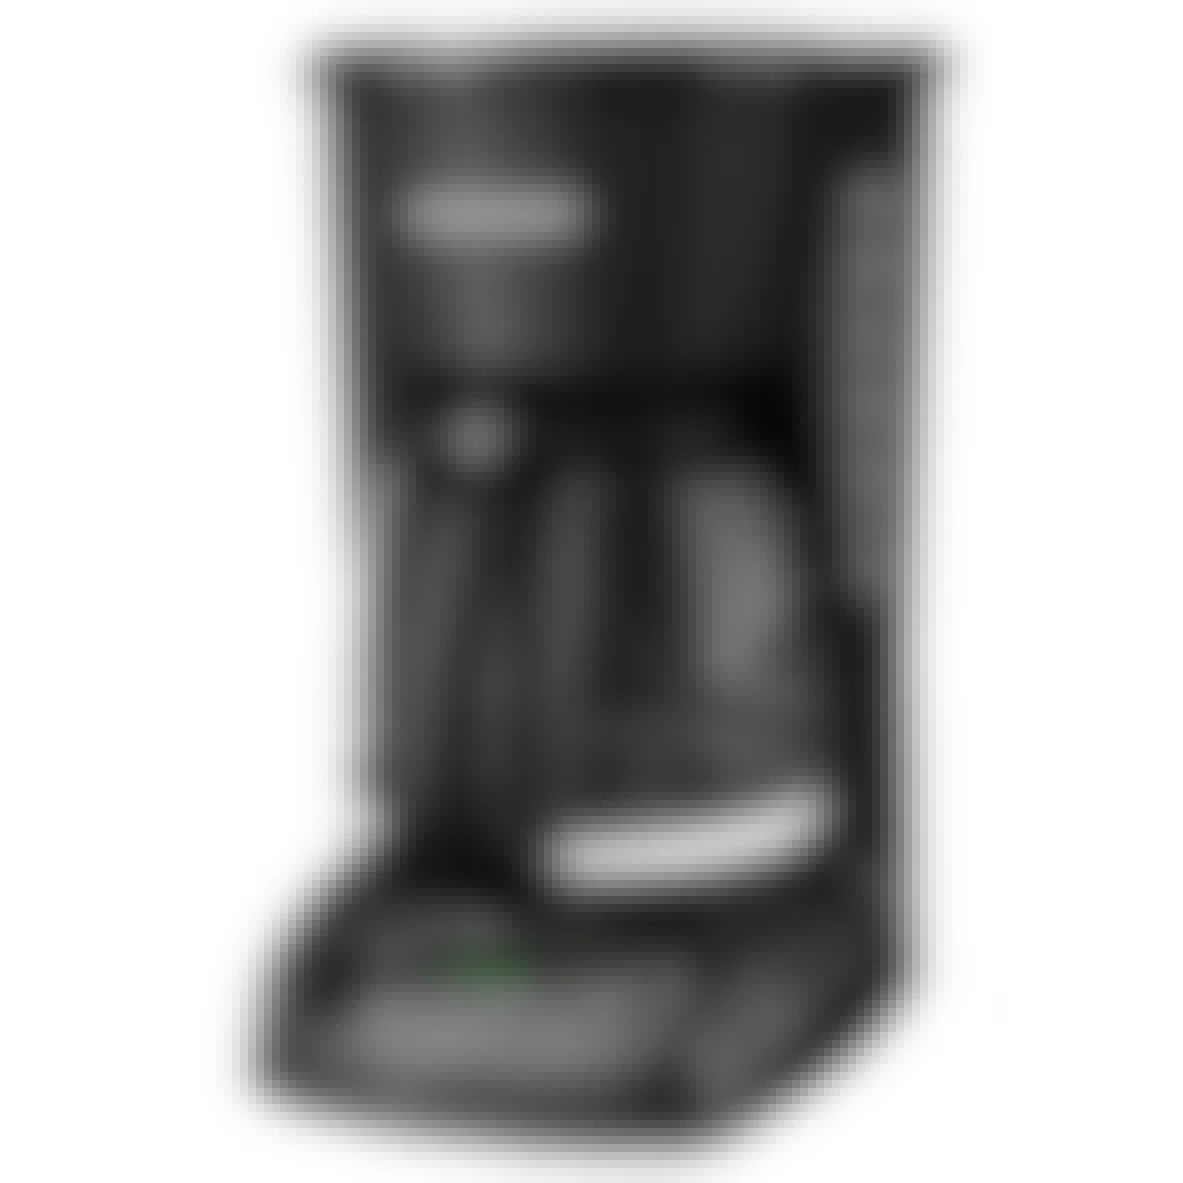 best cheap coffee maker - black and decker 12-cup programmable coffee maker